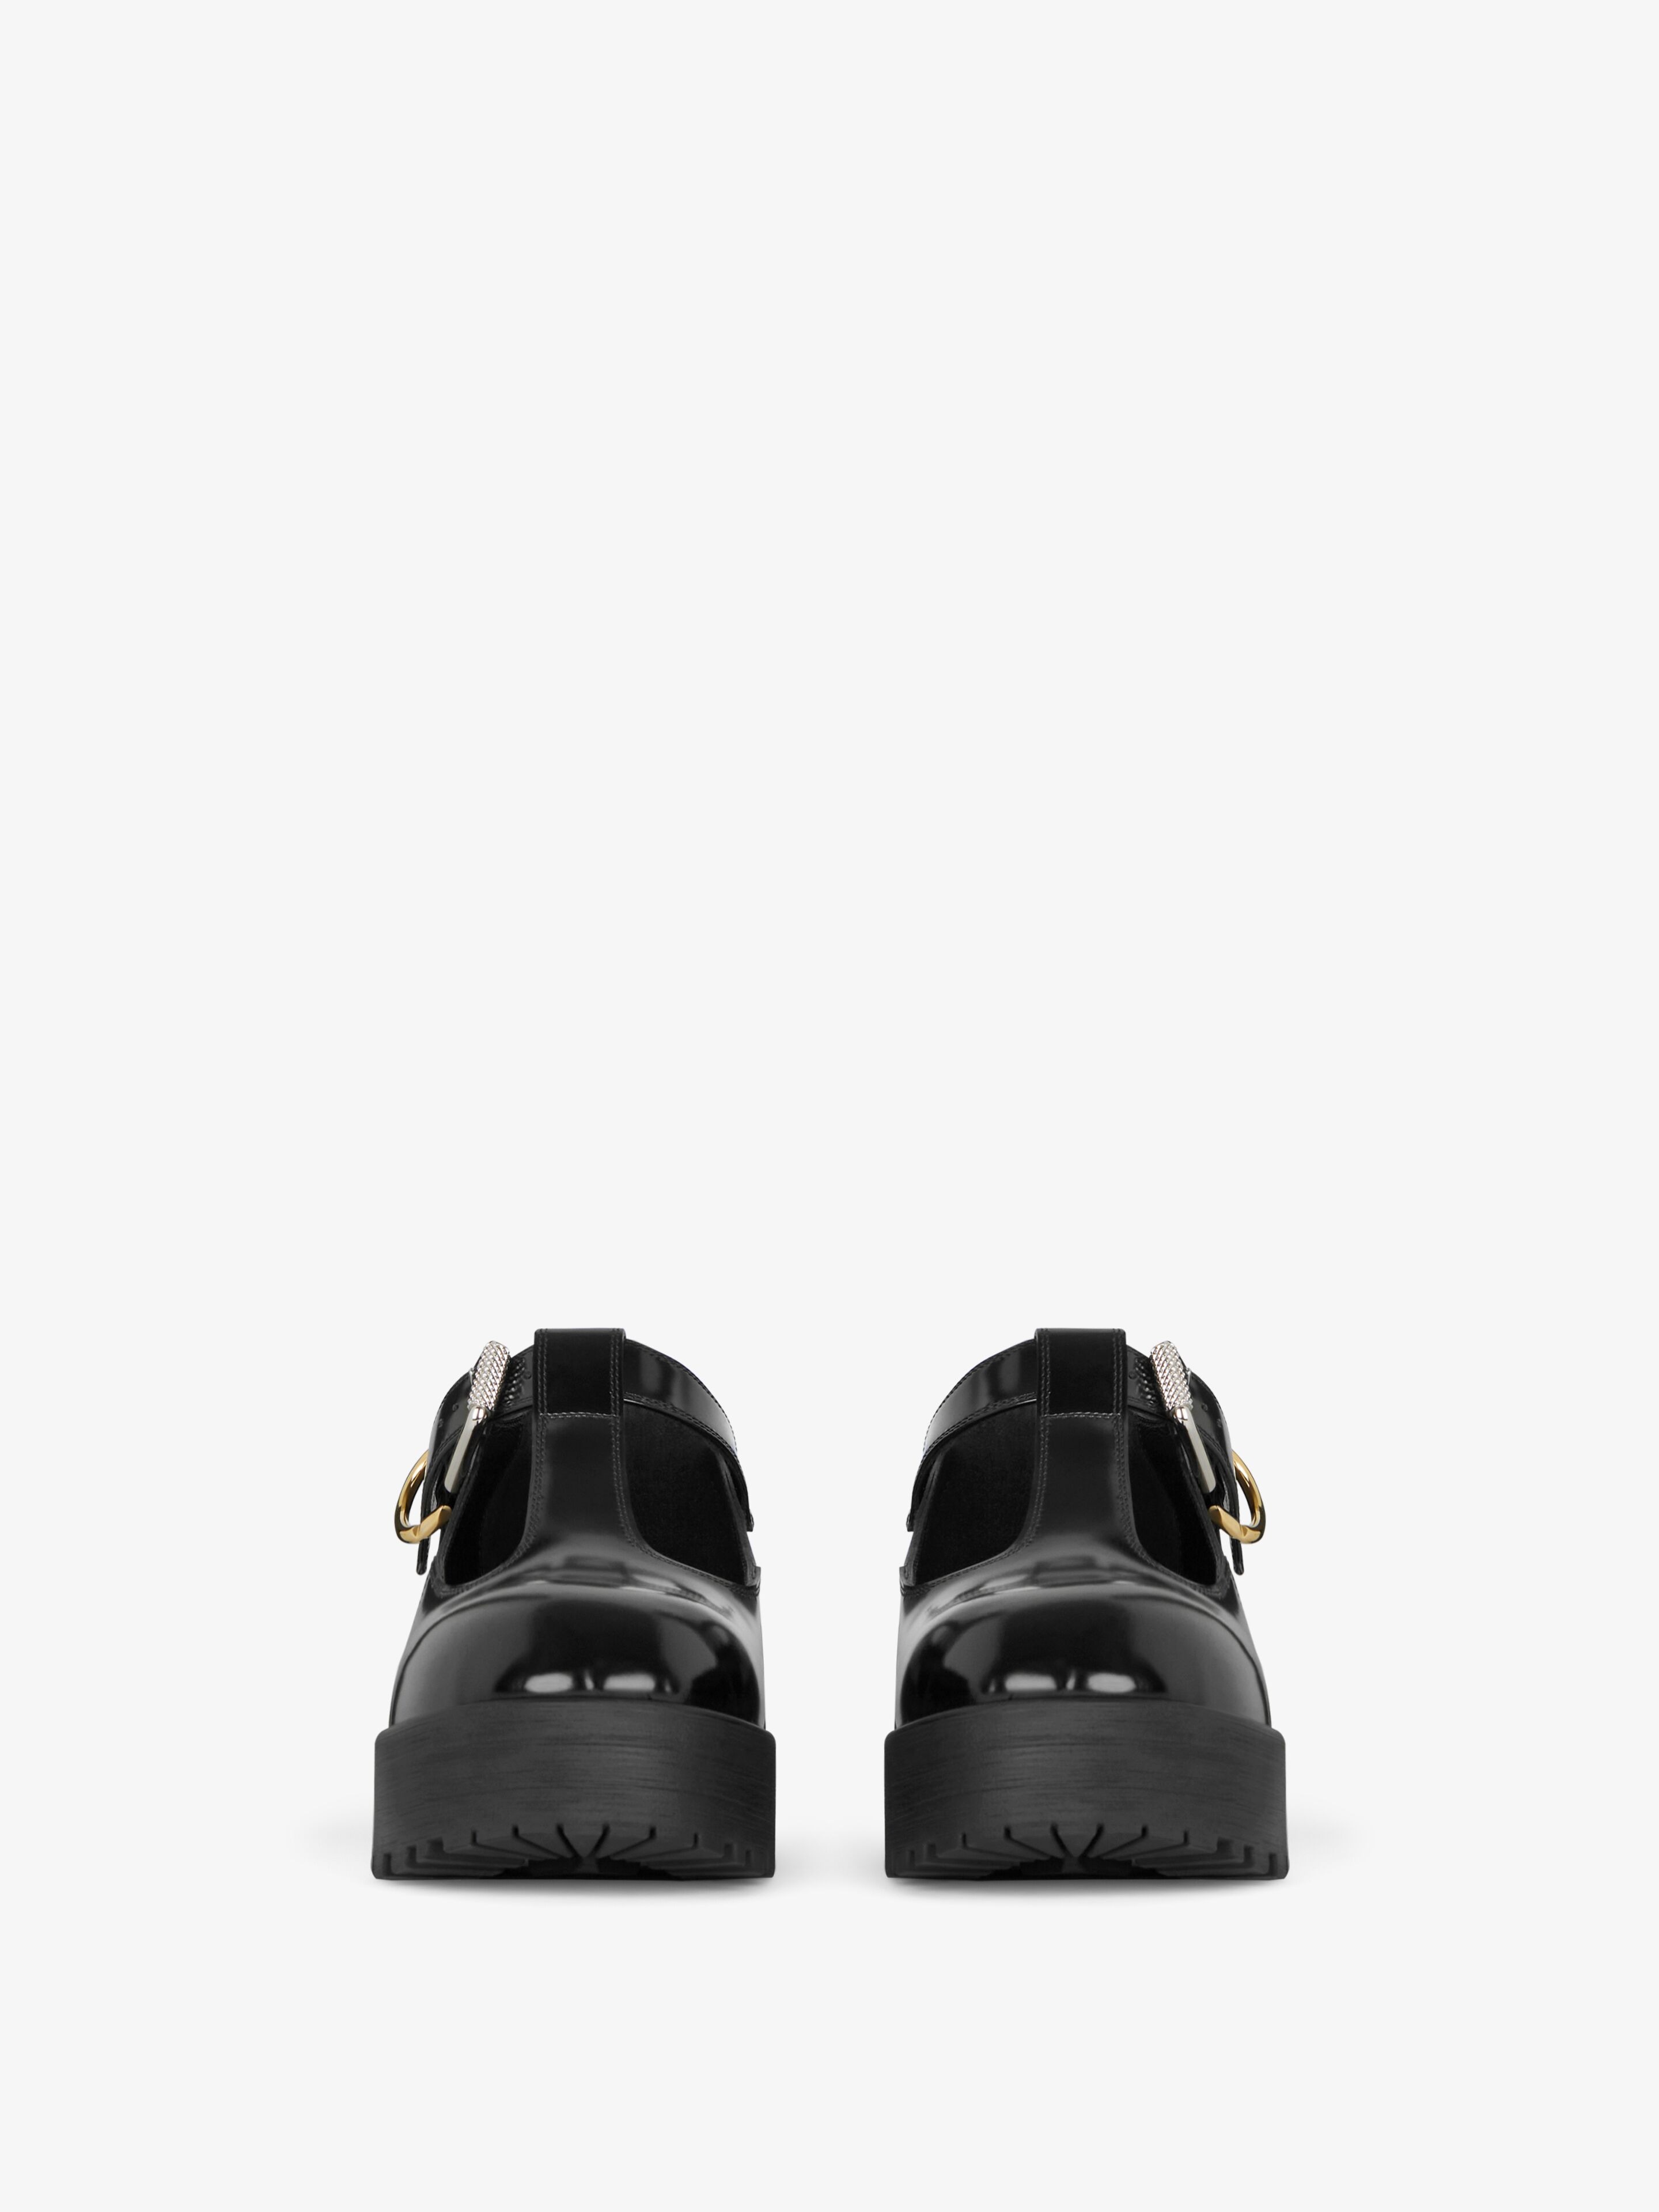 Givenchy Voyou Babies Pumps In Leather In Black